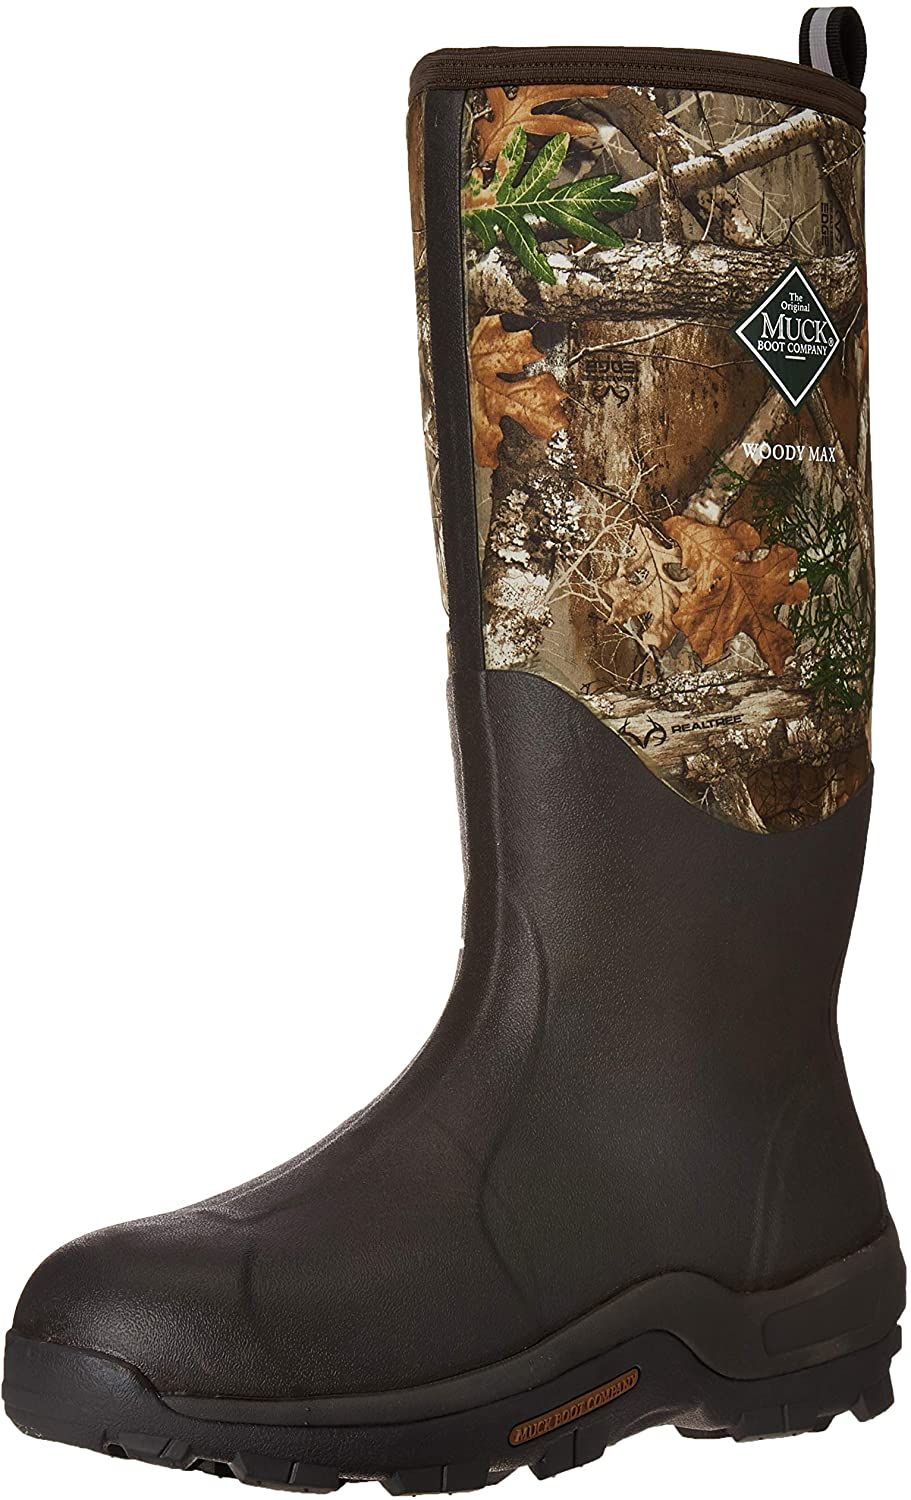 The 10 Best Hunting Boots of 2021 - ReviewThis